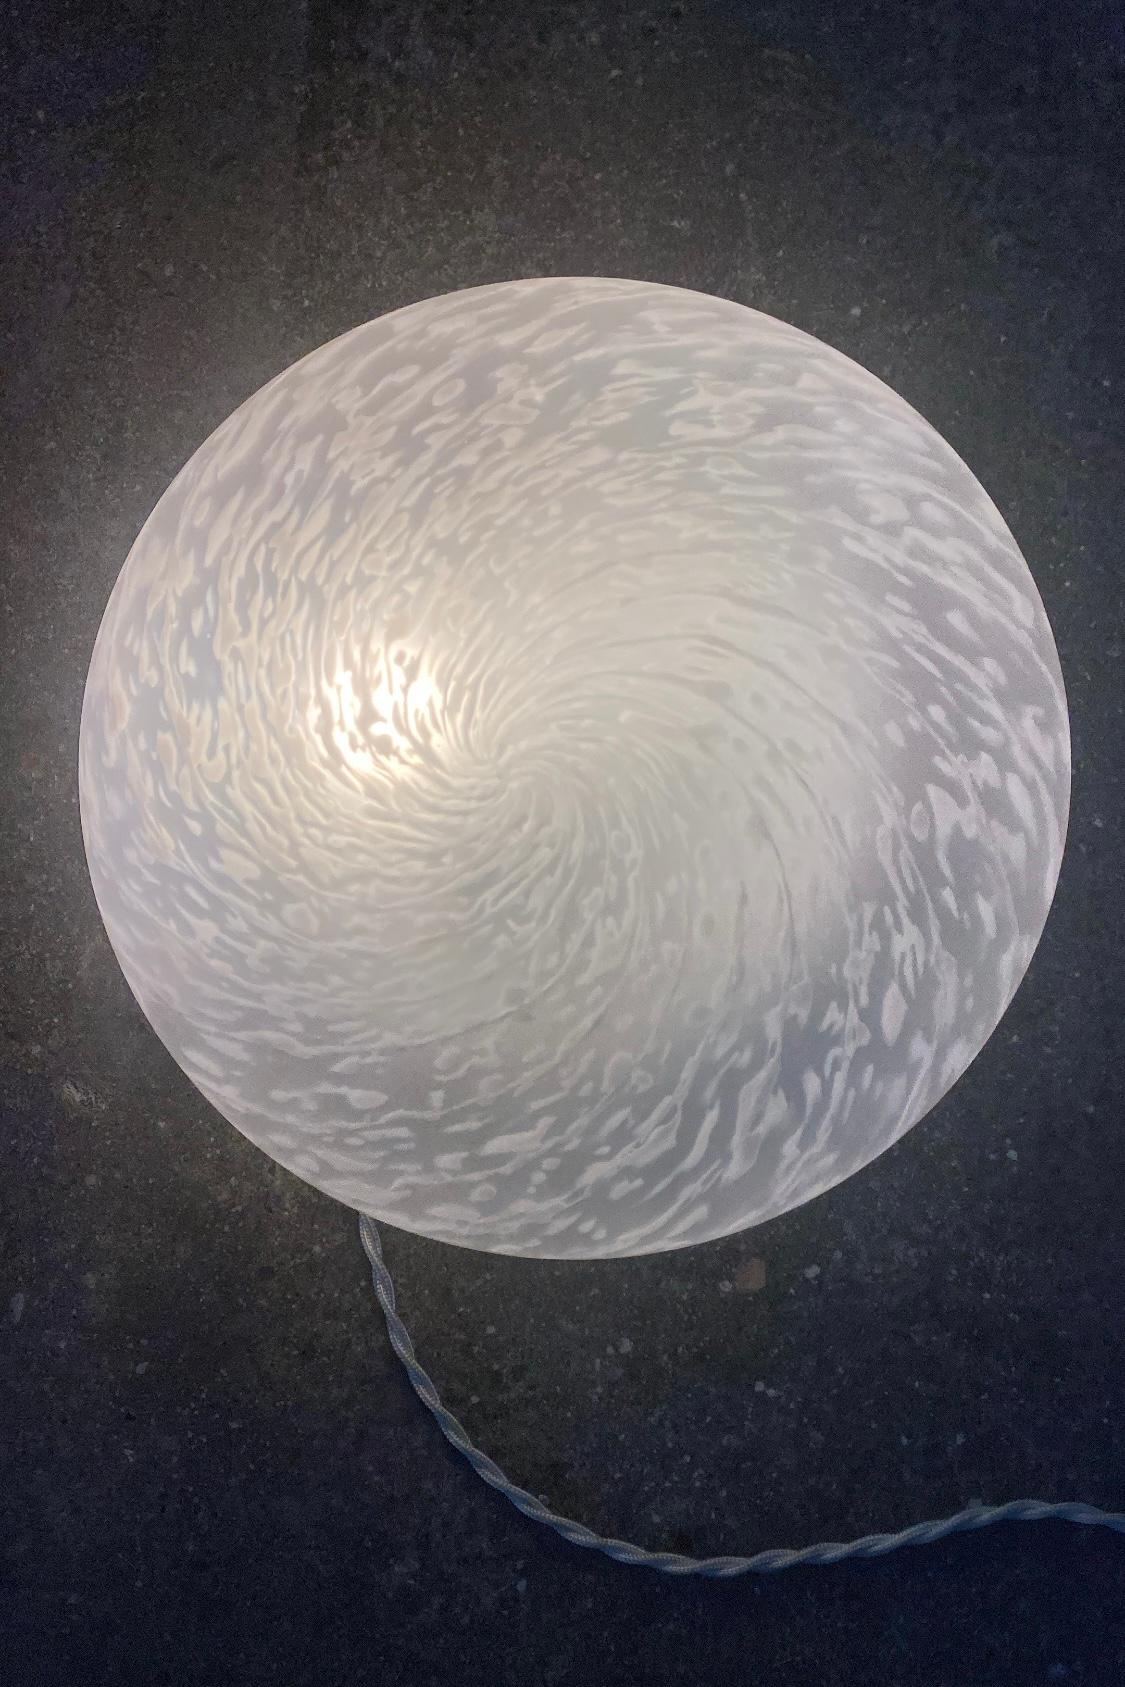 Vintage Murano plafond ceiling lamp / wall lamp. Mouth-blown glass with a satin matte surface and white swirl and white base. E27 socket. Handmade in Italy, 1970s.

D: 30 cm H: 12 cm.